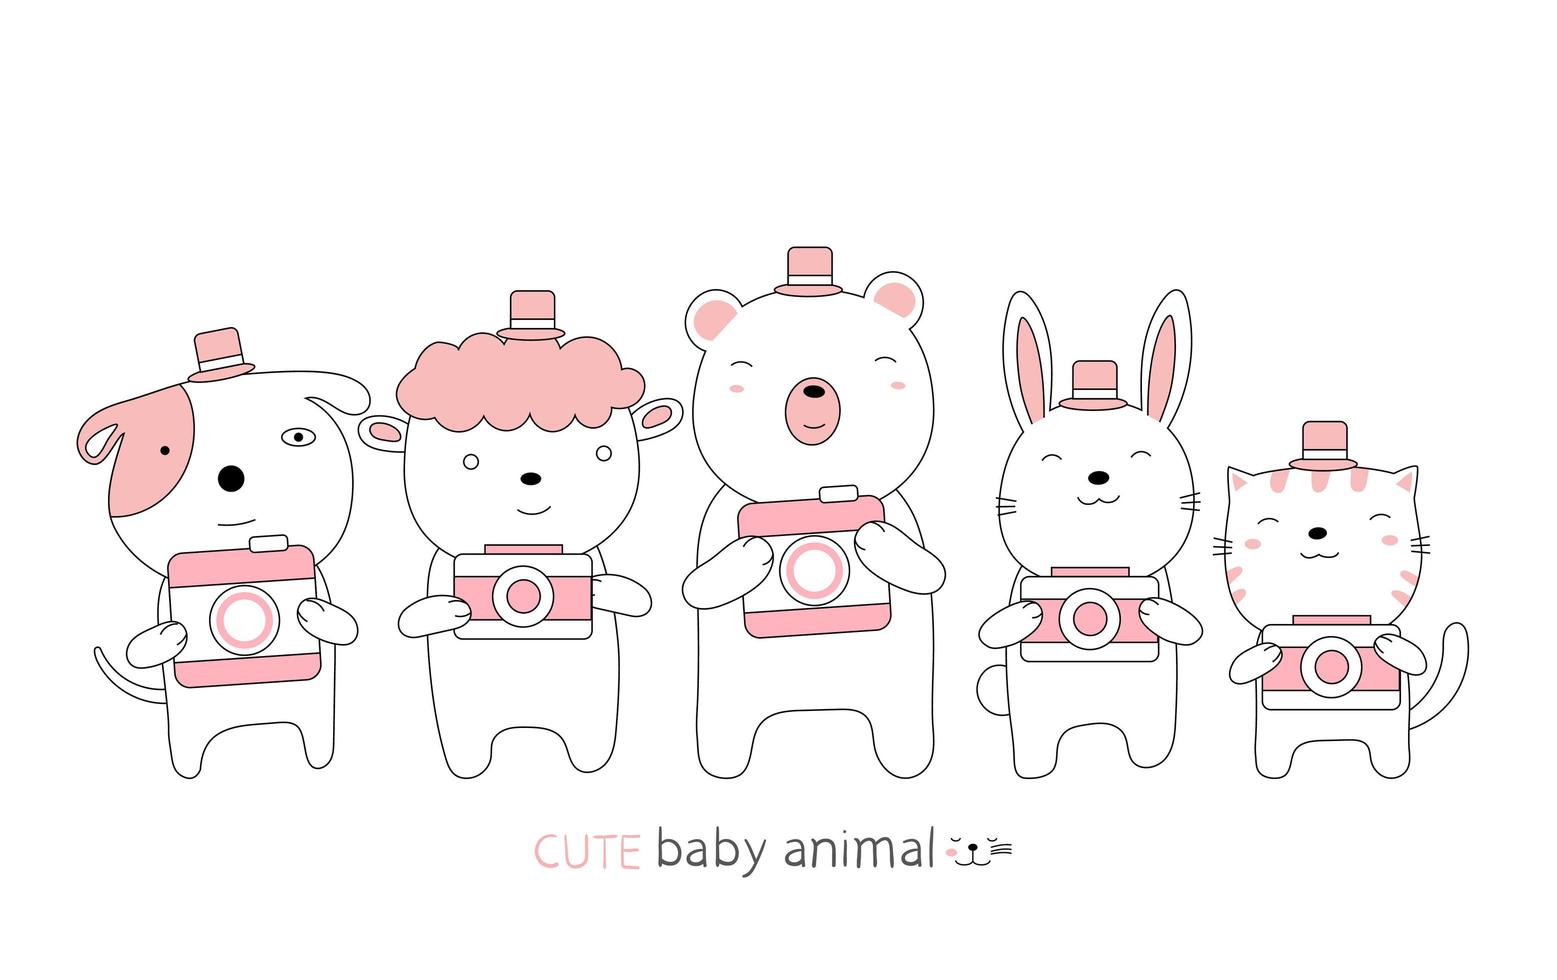 Cartoon cute baby animals and cameras. Hand-drawn style. vector